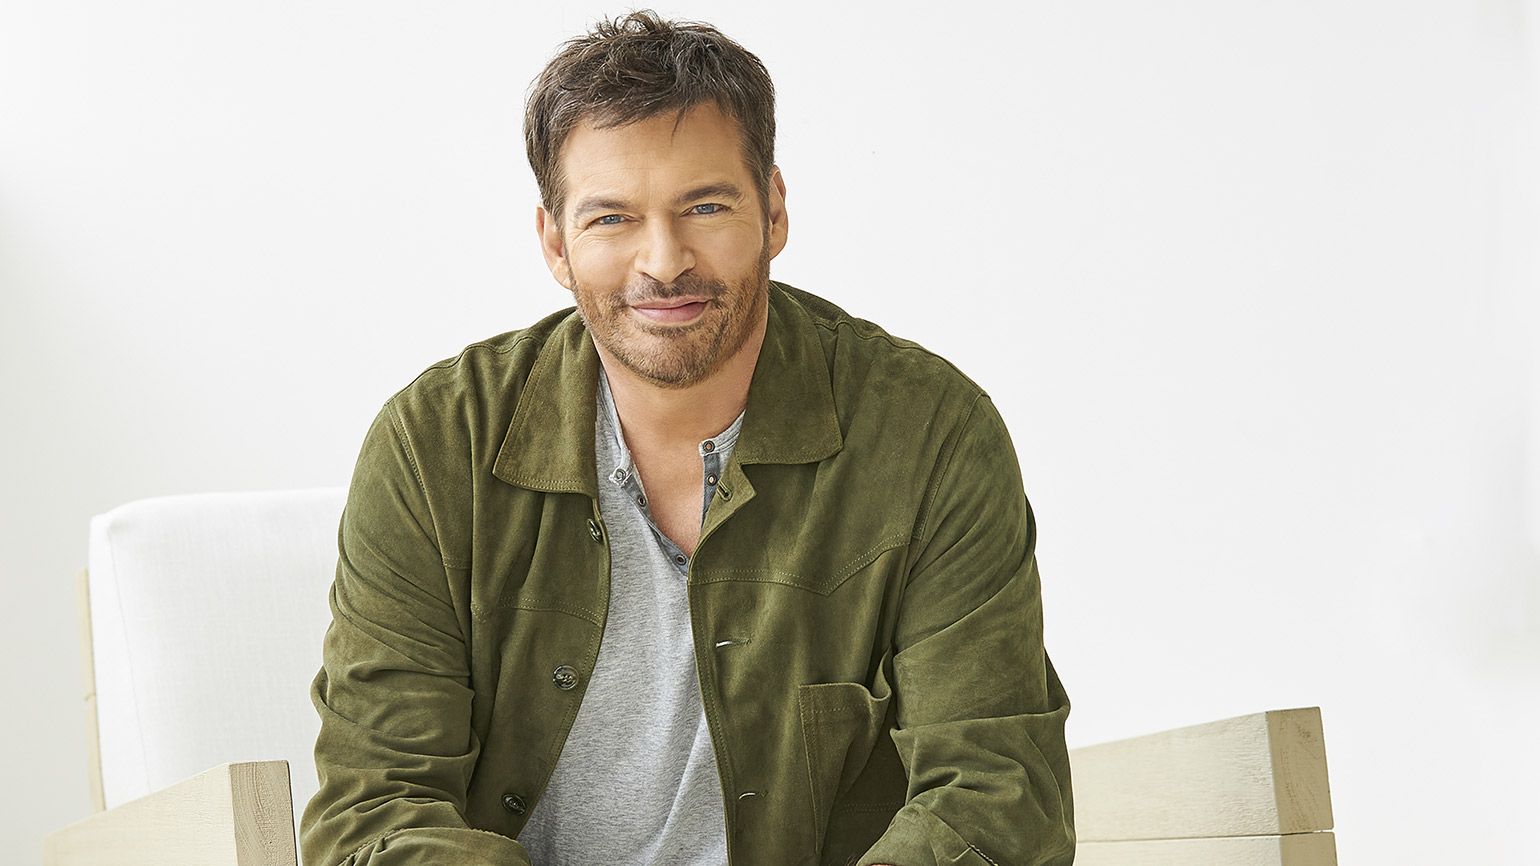 Harry Connick Jr. Explores His Faith in New Solo Album Guideposts